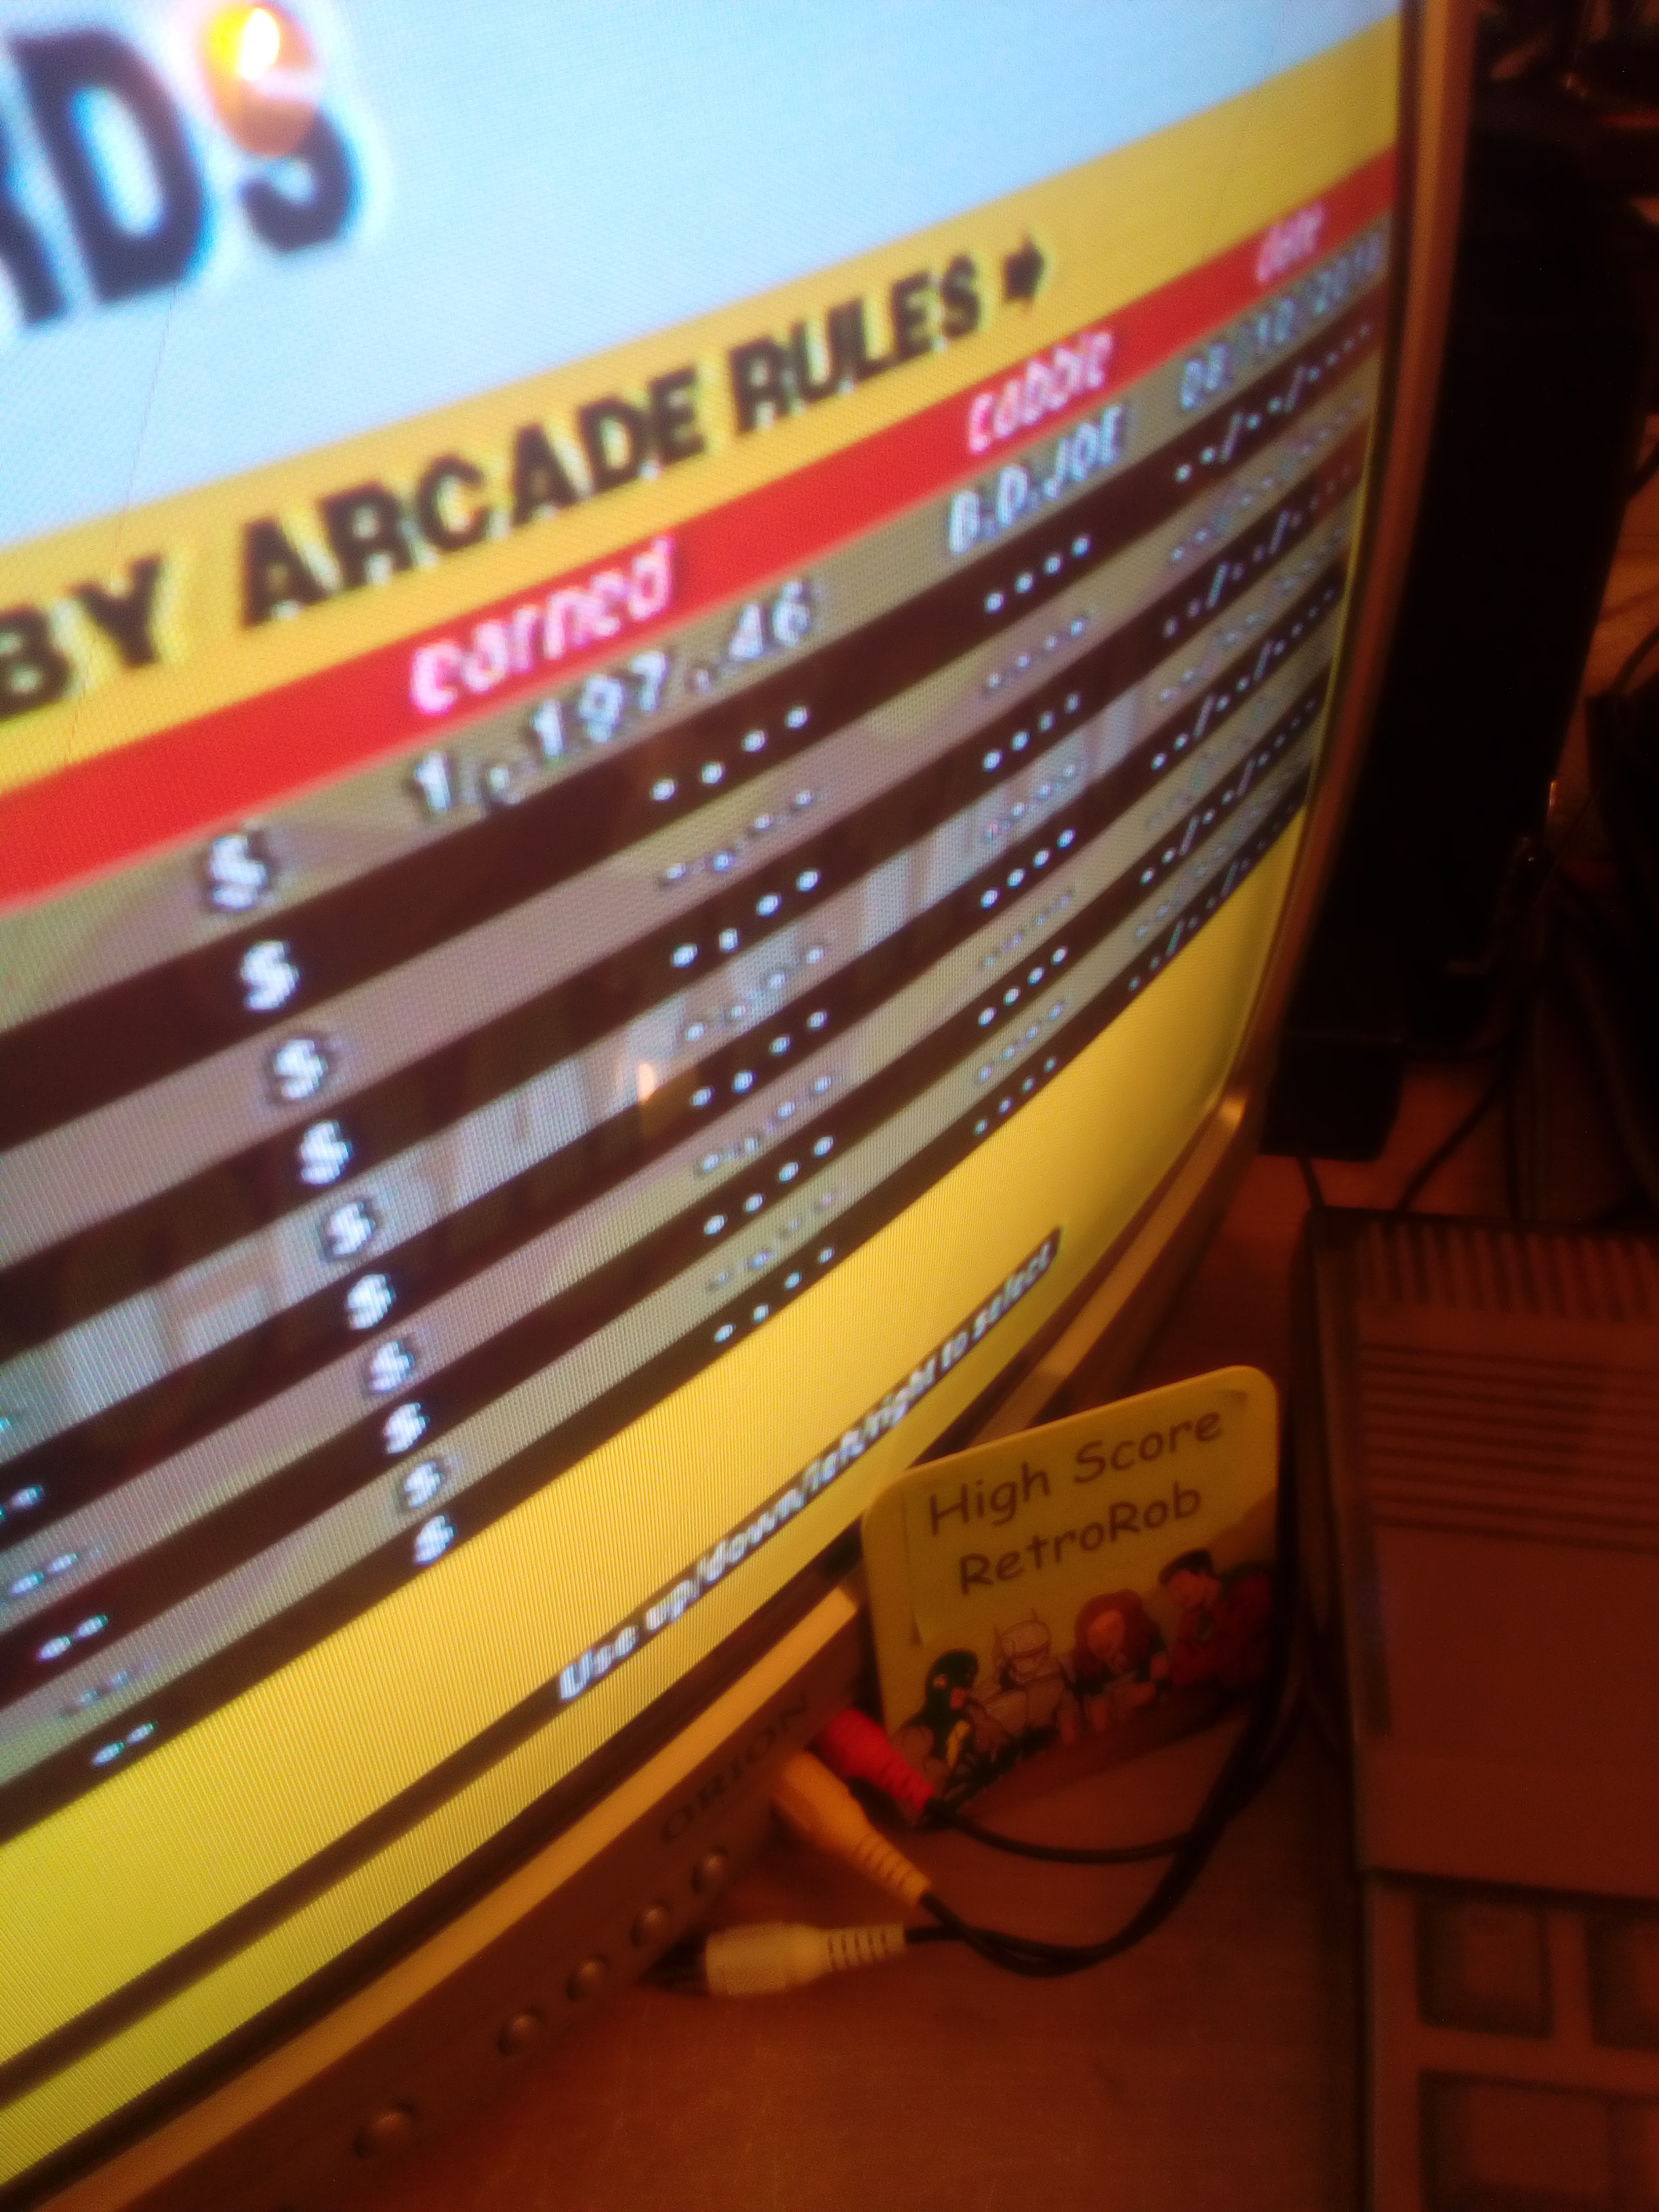 RetroRob: Crazy Taxi (Dreamcast) 1,197 points on 2018-08-10 12:22:58